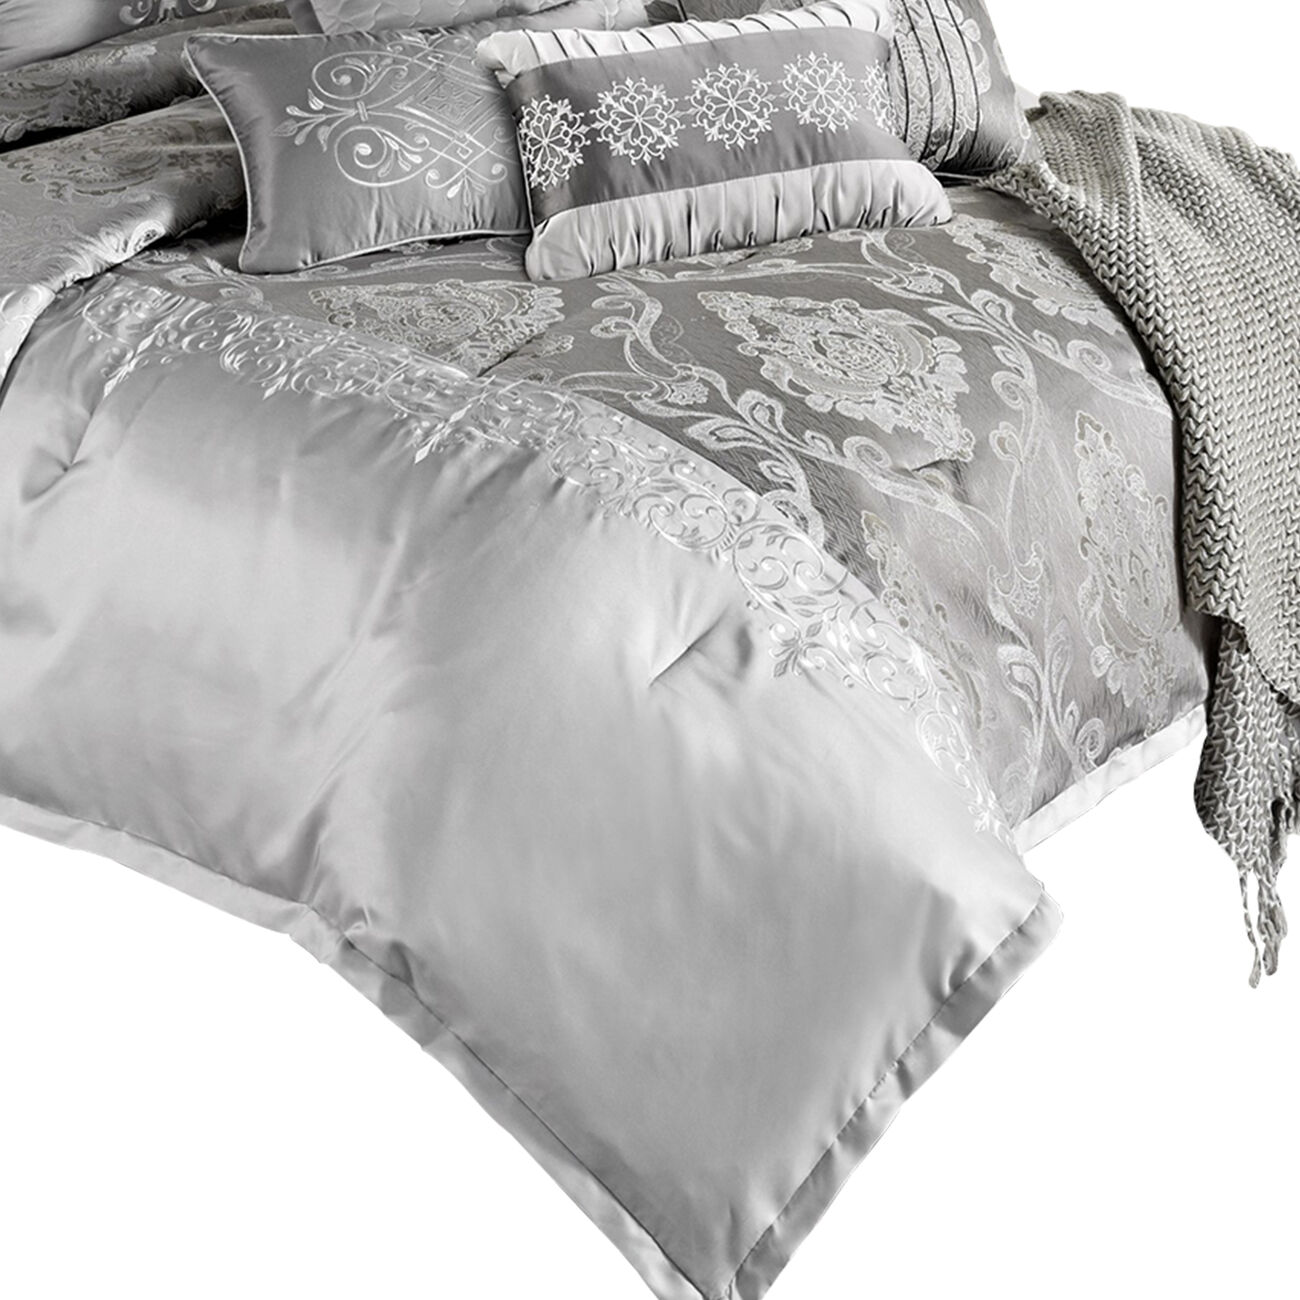 12 Piece Queen Polyester Comforter Set with Medallion Print, Platinum Gray